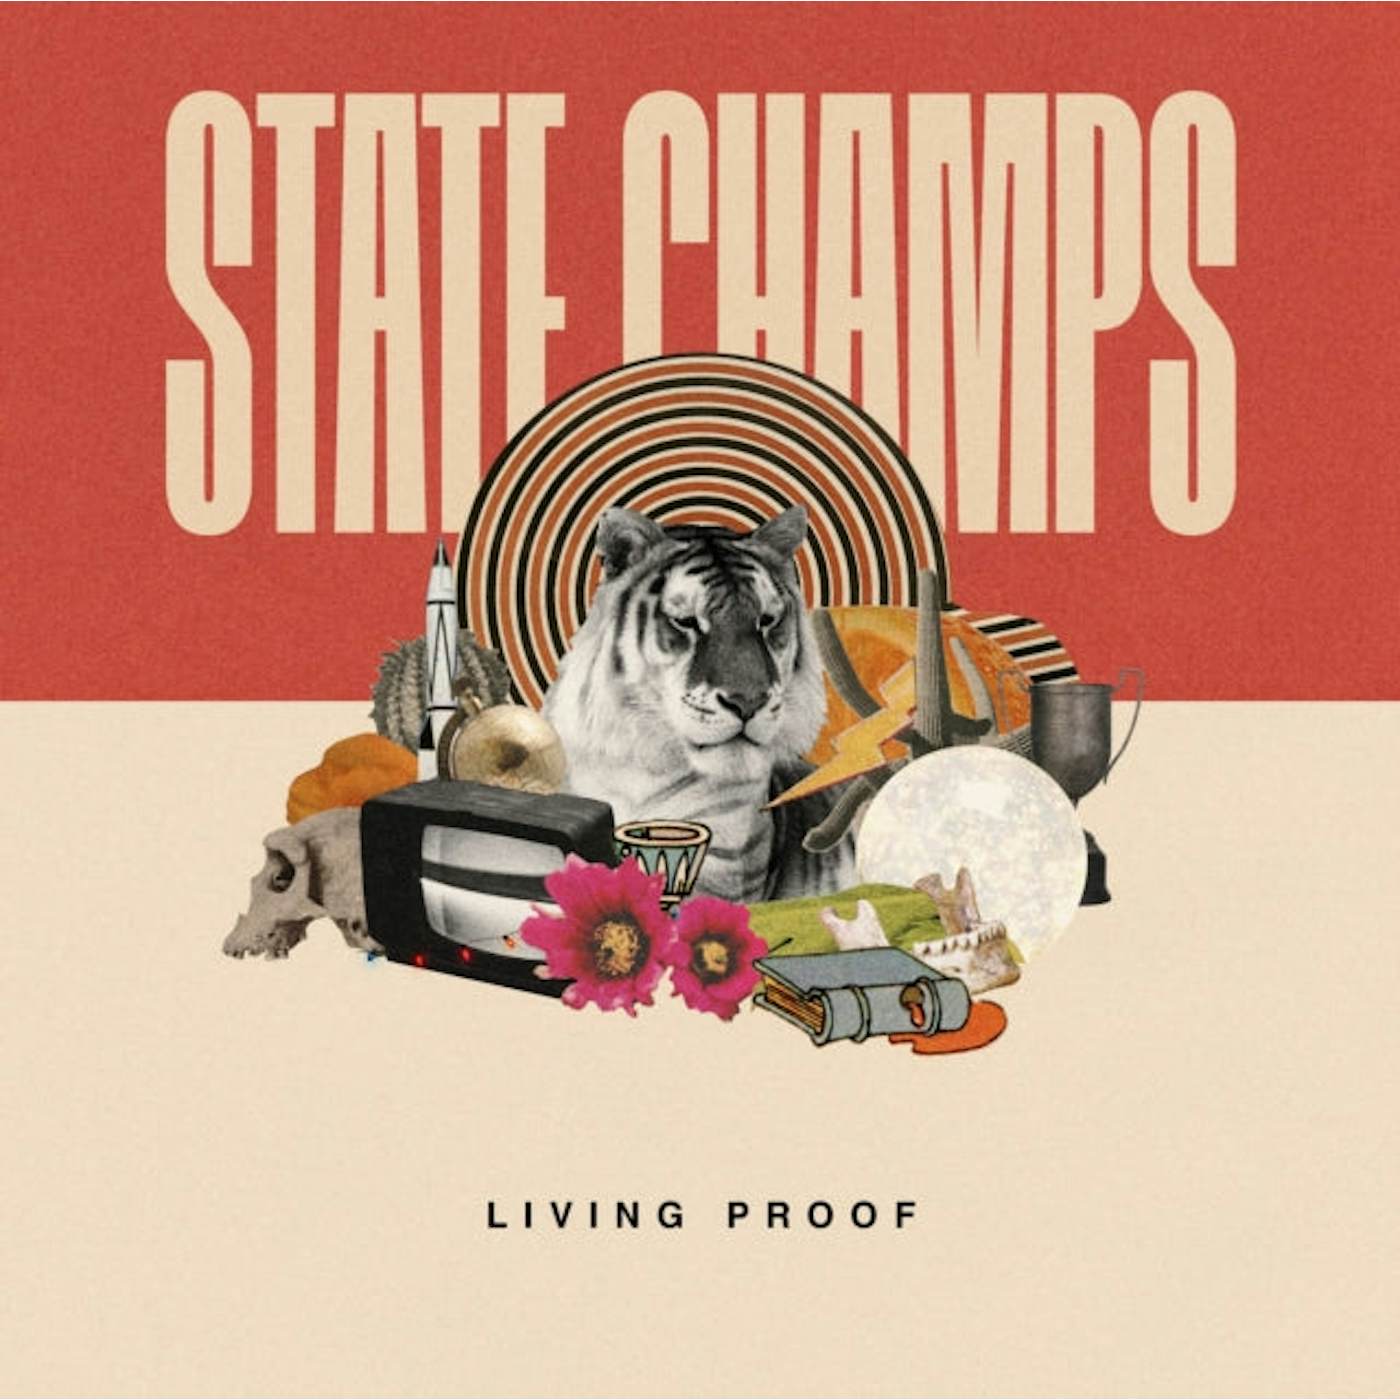  State Champs LP - Living Proof (Vinyl)